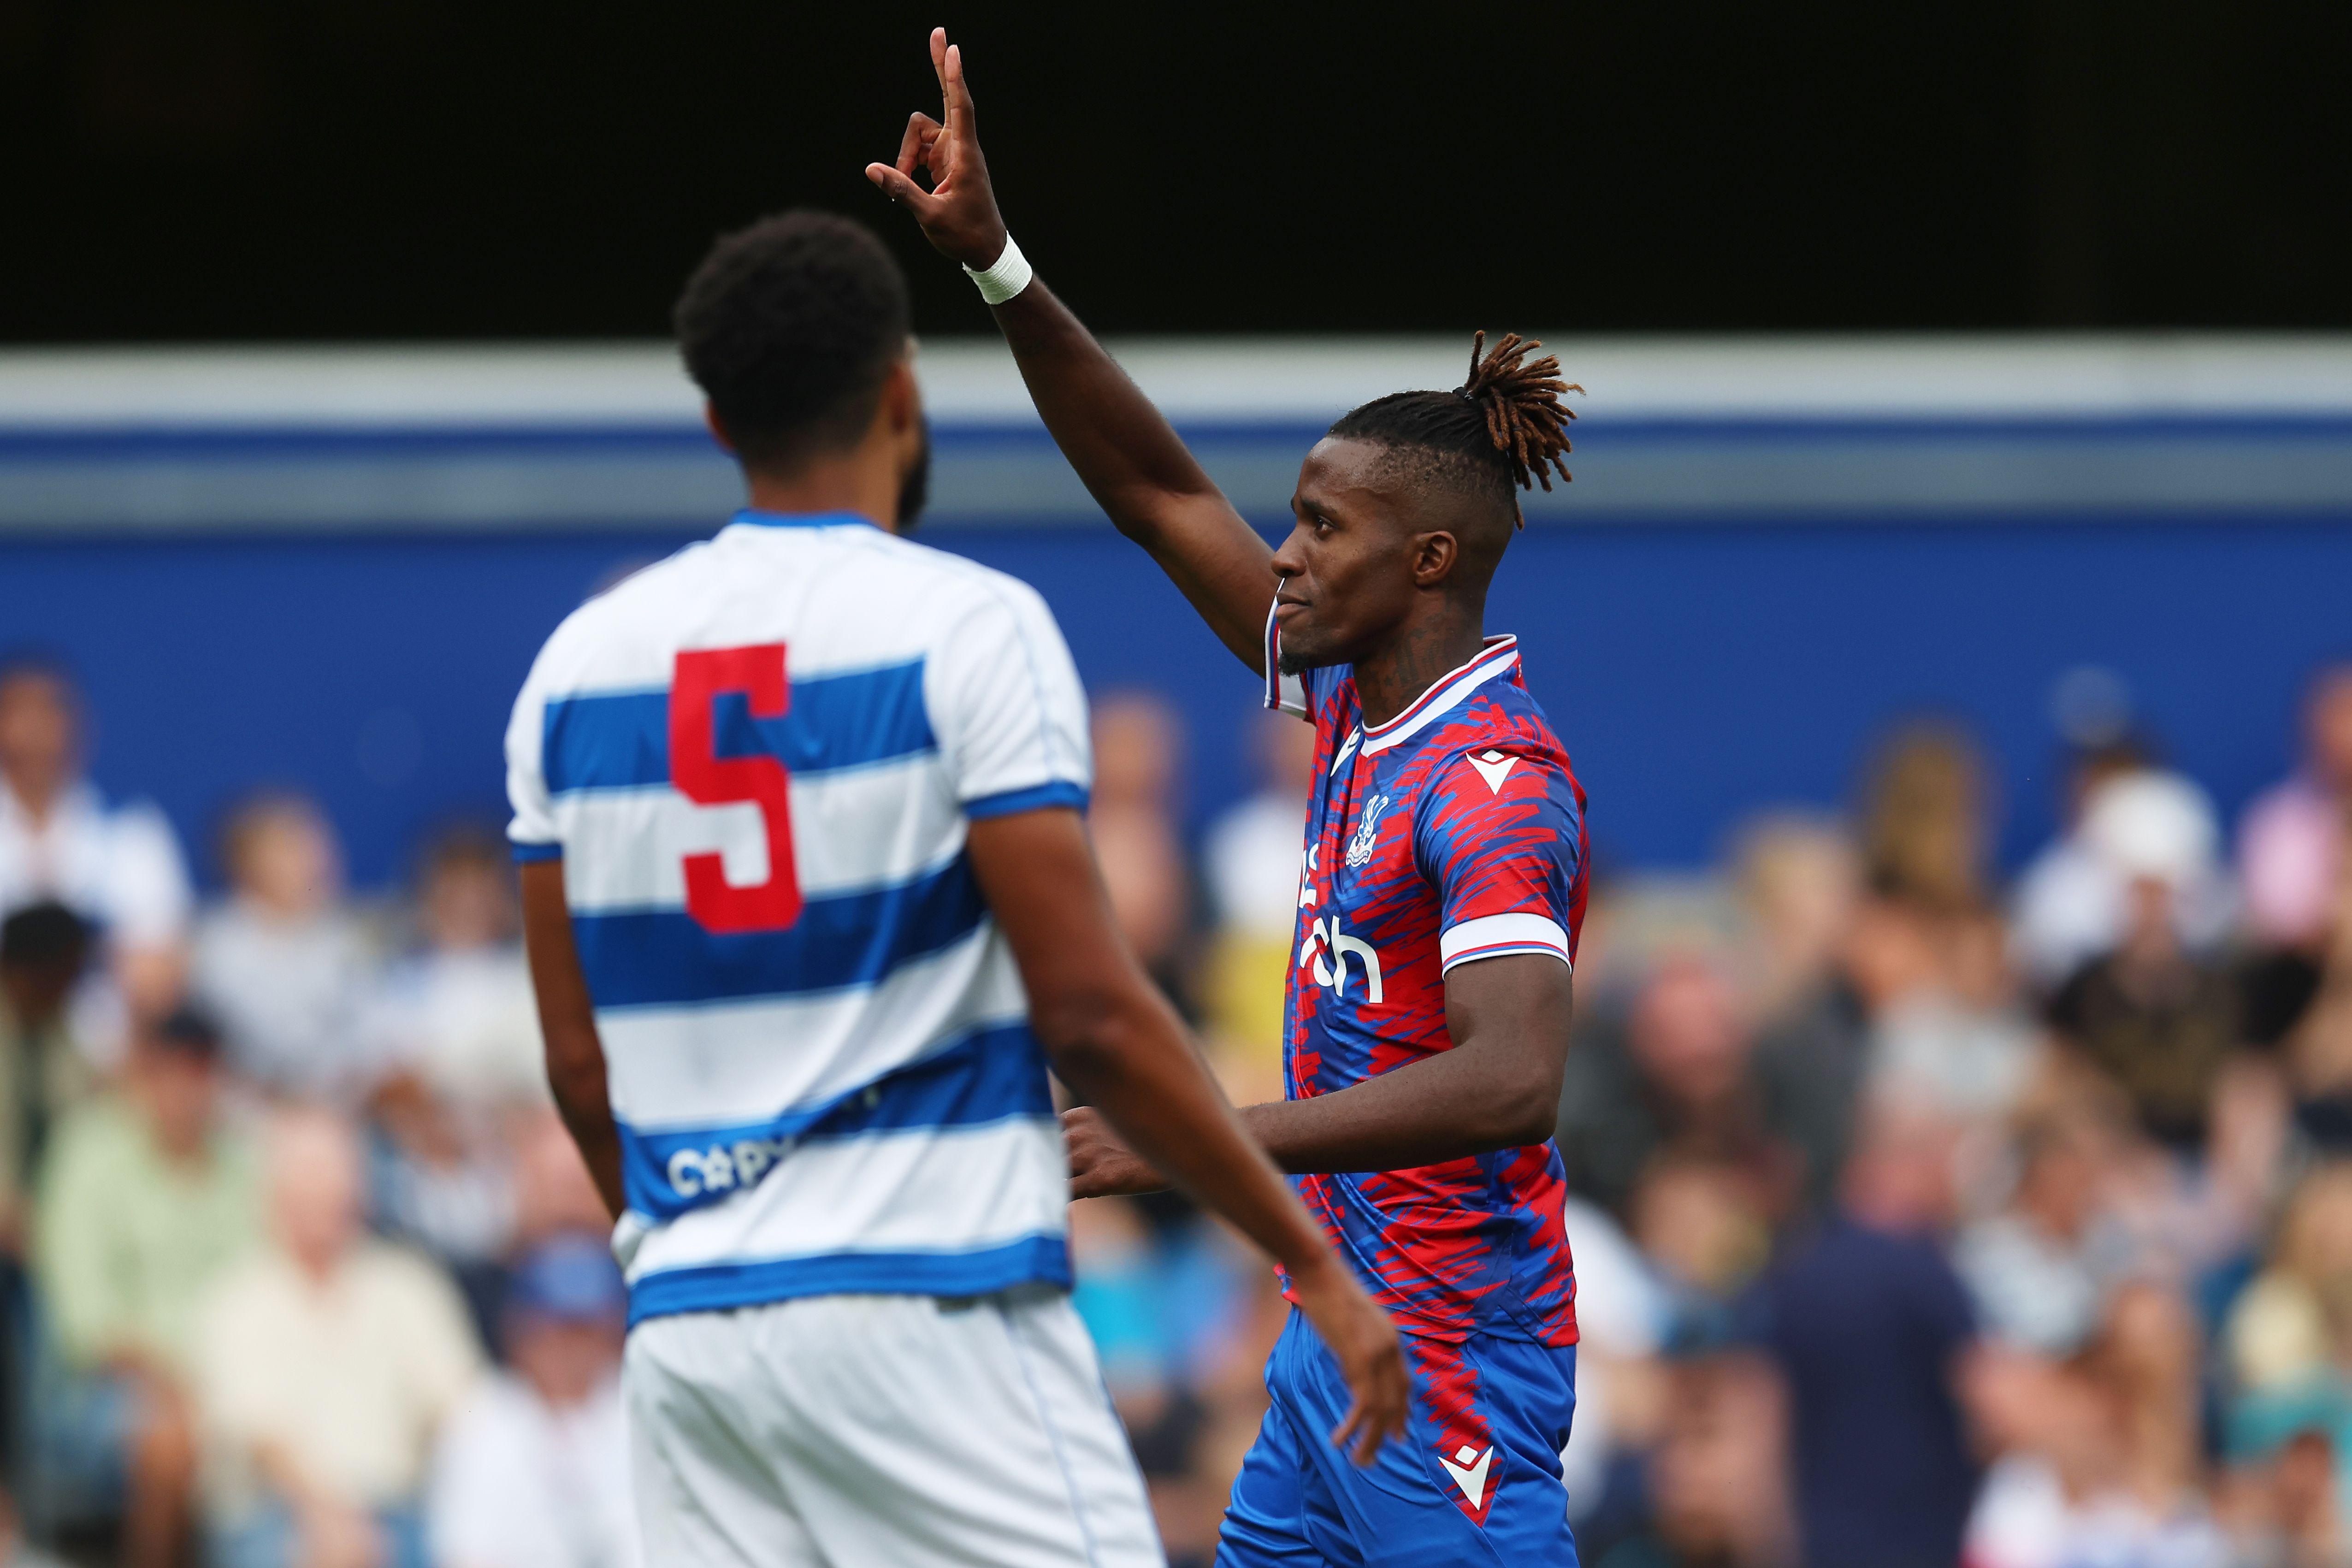 Wilfried Zaha of Crystal Palace celebrates after scoring their team's second goal during the Pre-Season Friendly Match between Queens Park Rangers and Crystal Palace at Loftus Road on July 23, 2022 in London, England.